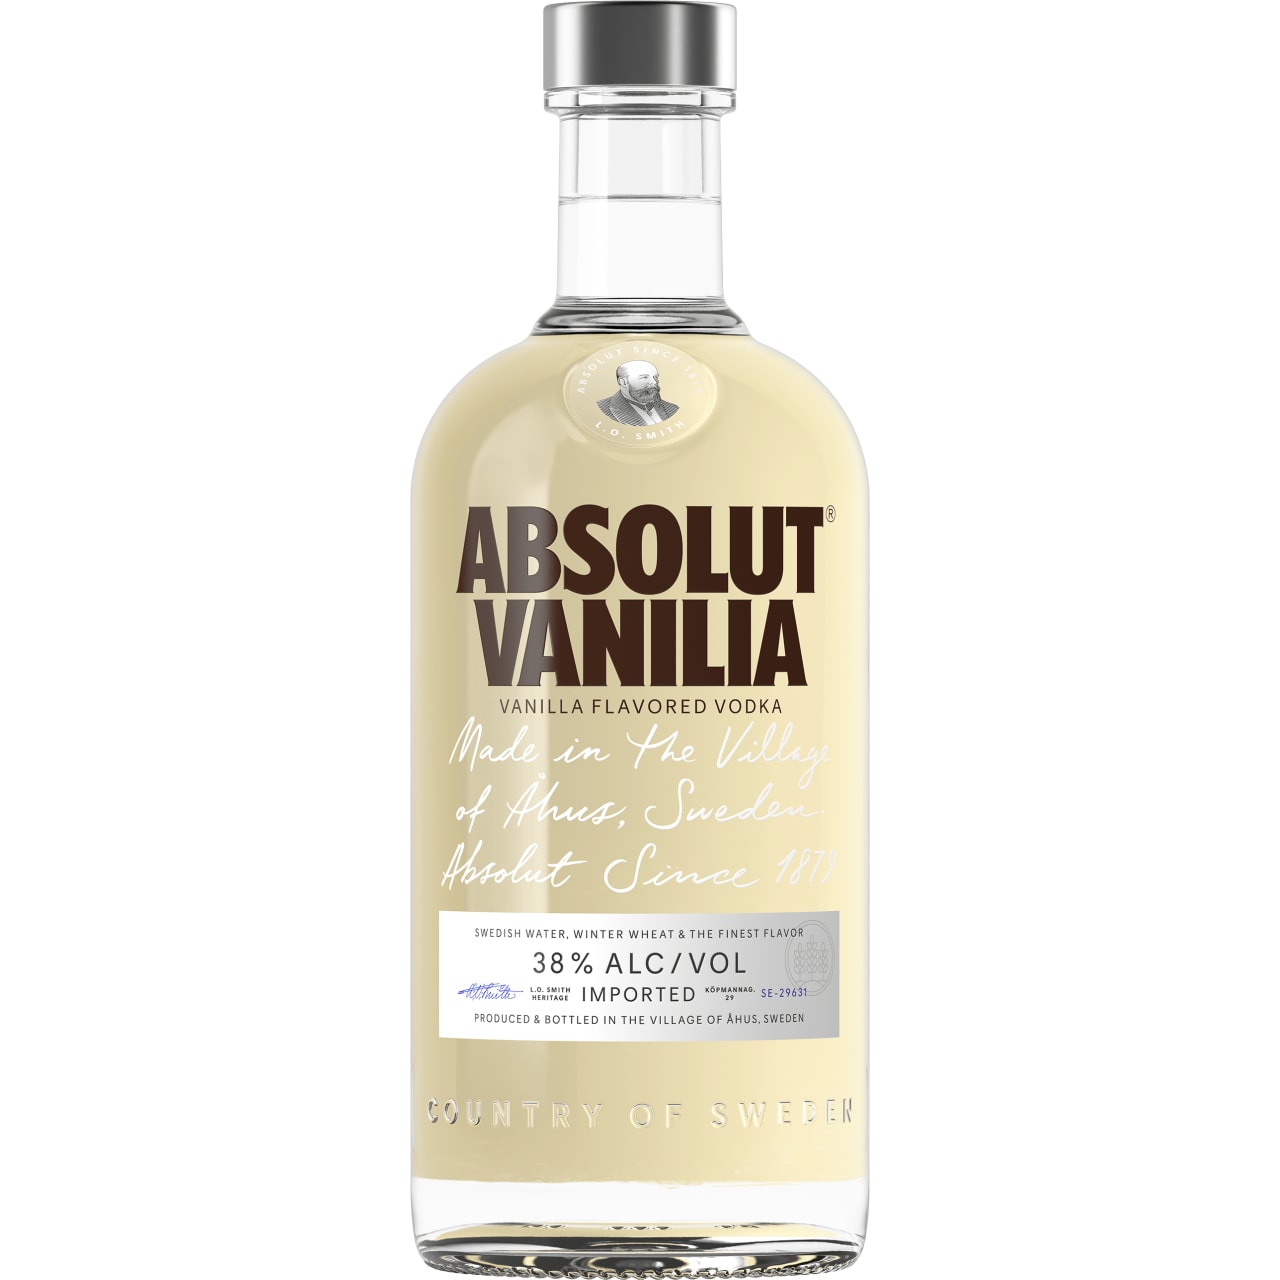 Absolut Vanilia is rich, robust and delicious with a distinct character of vanilla, notes of butterscotch and hints of dark chocolate.